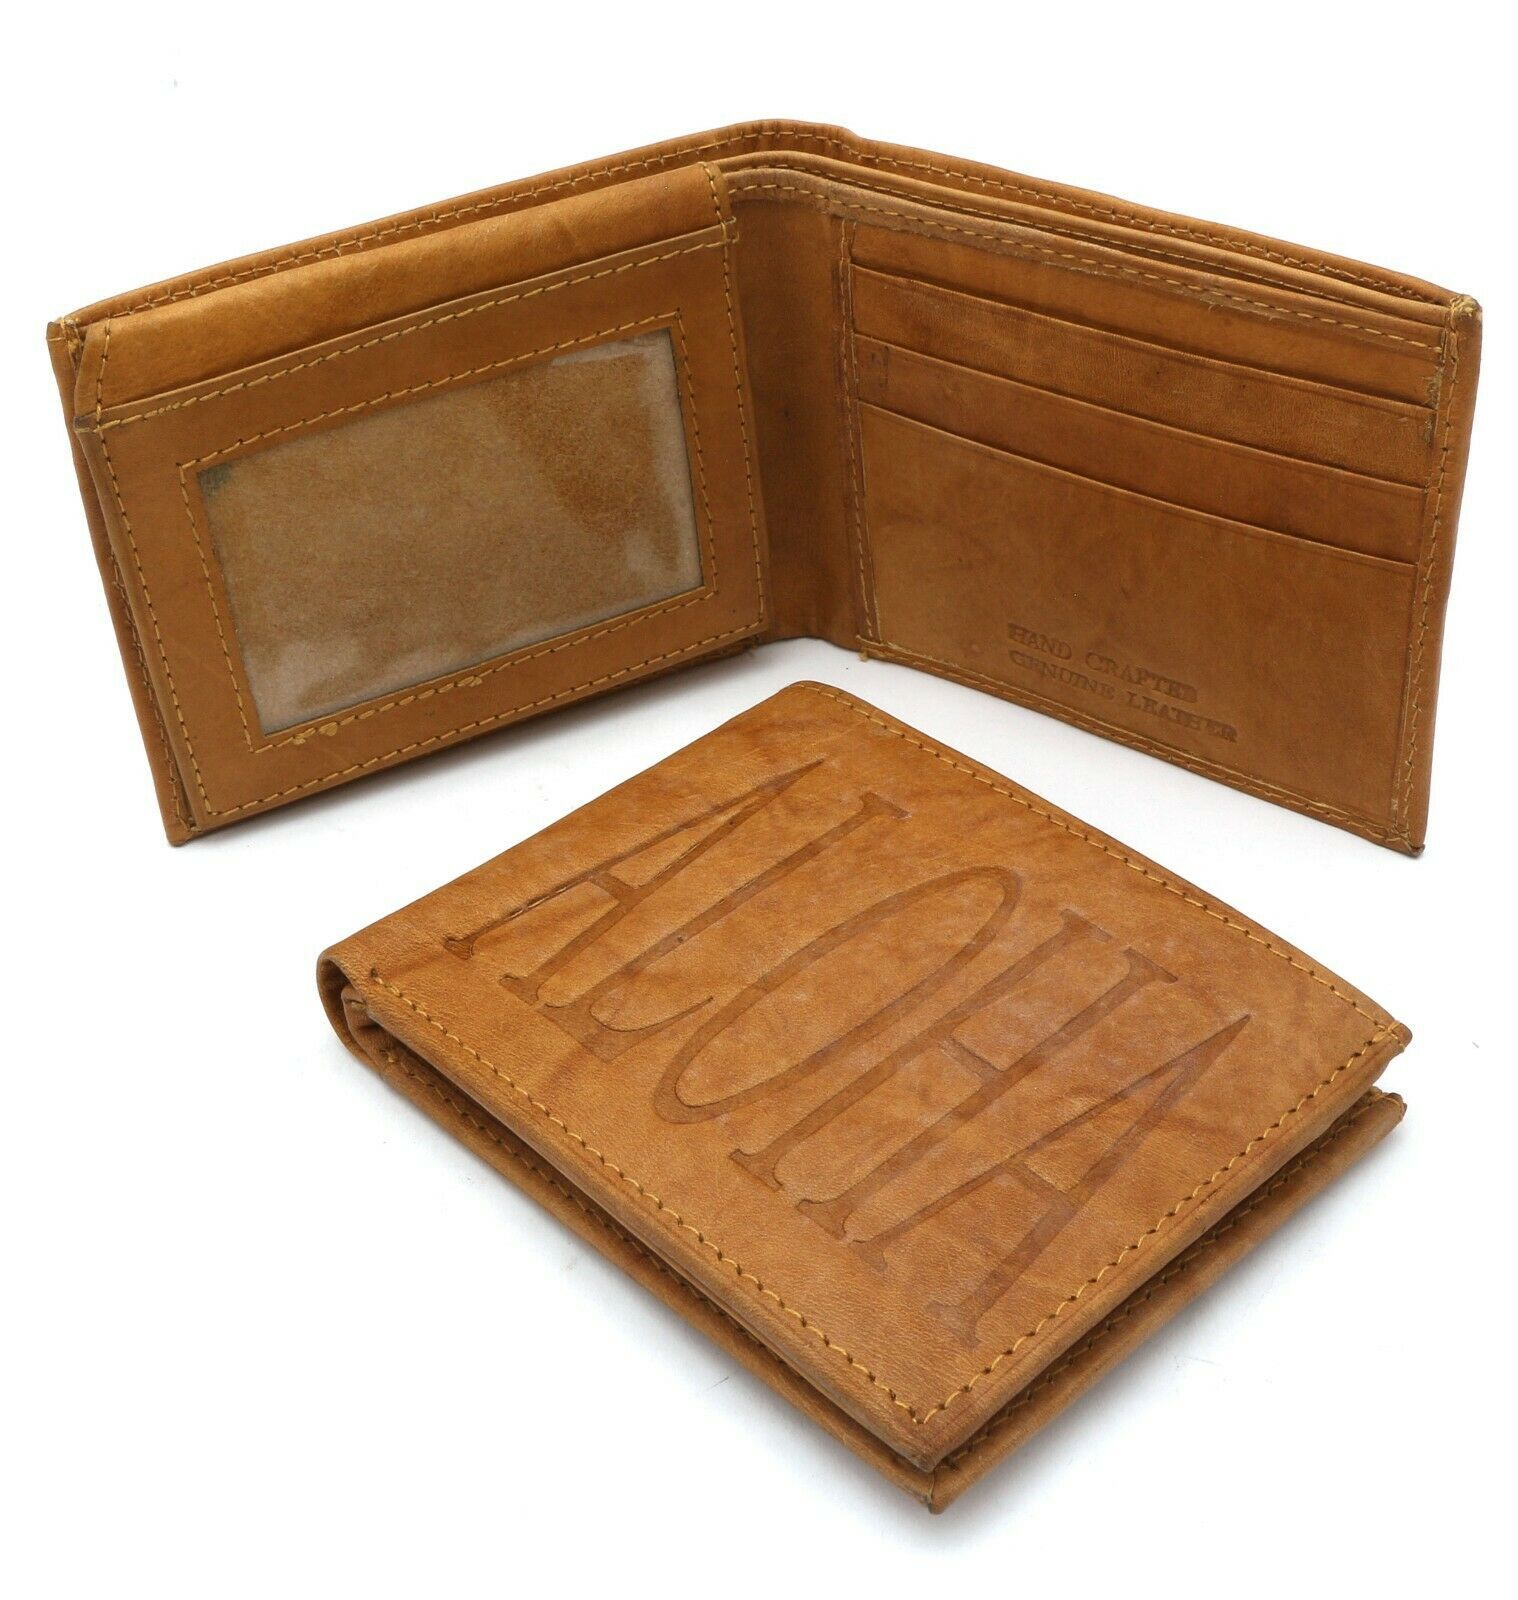 Primary image for Bifold Genuine Cow Leather Beige Color Wallet with "Aloha" Embossed Design